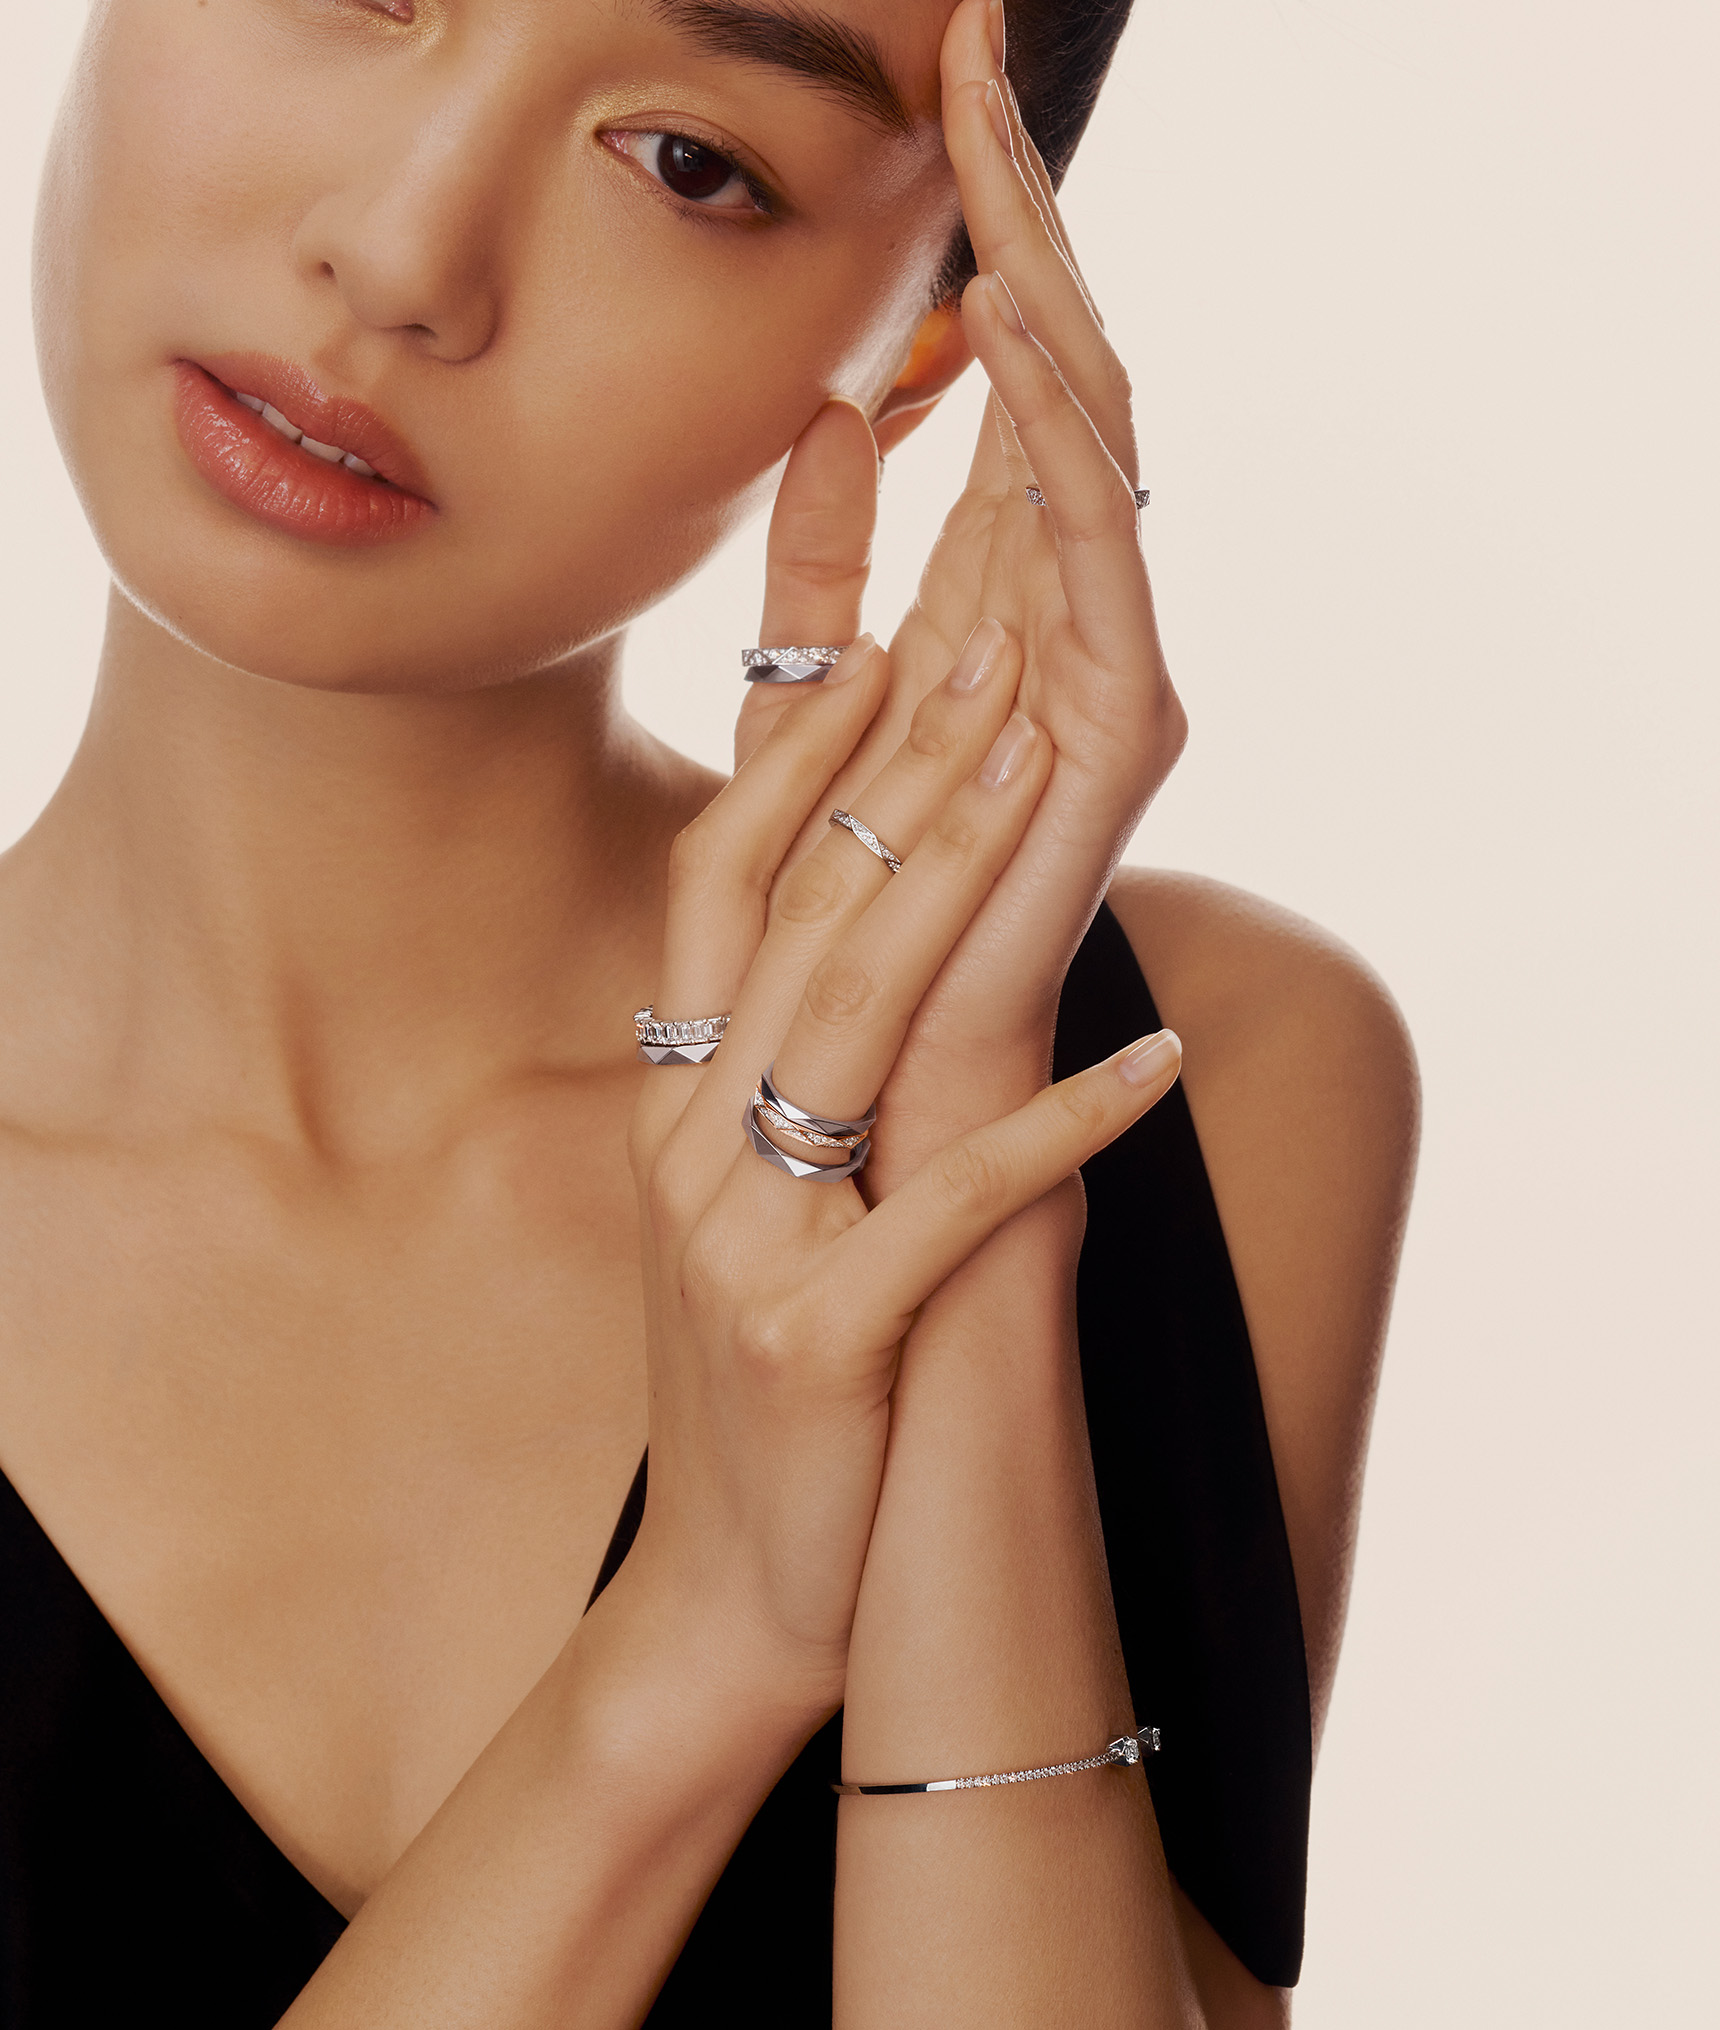 Models wear Graff Laurence Signature jewellery collection